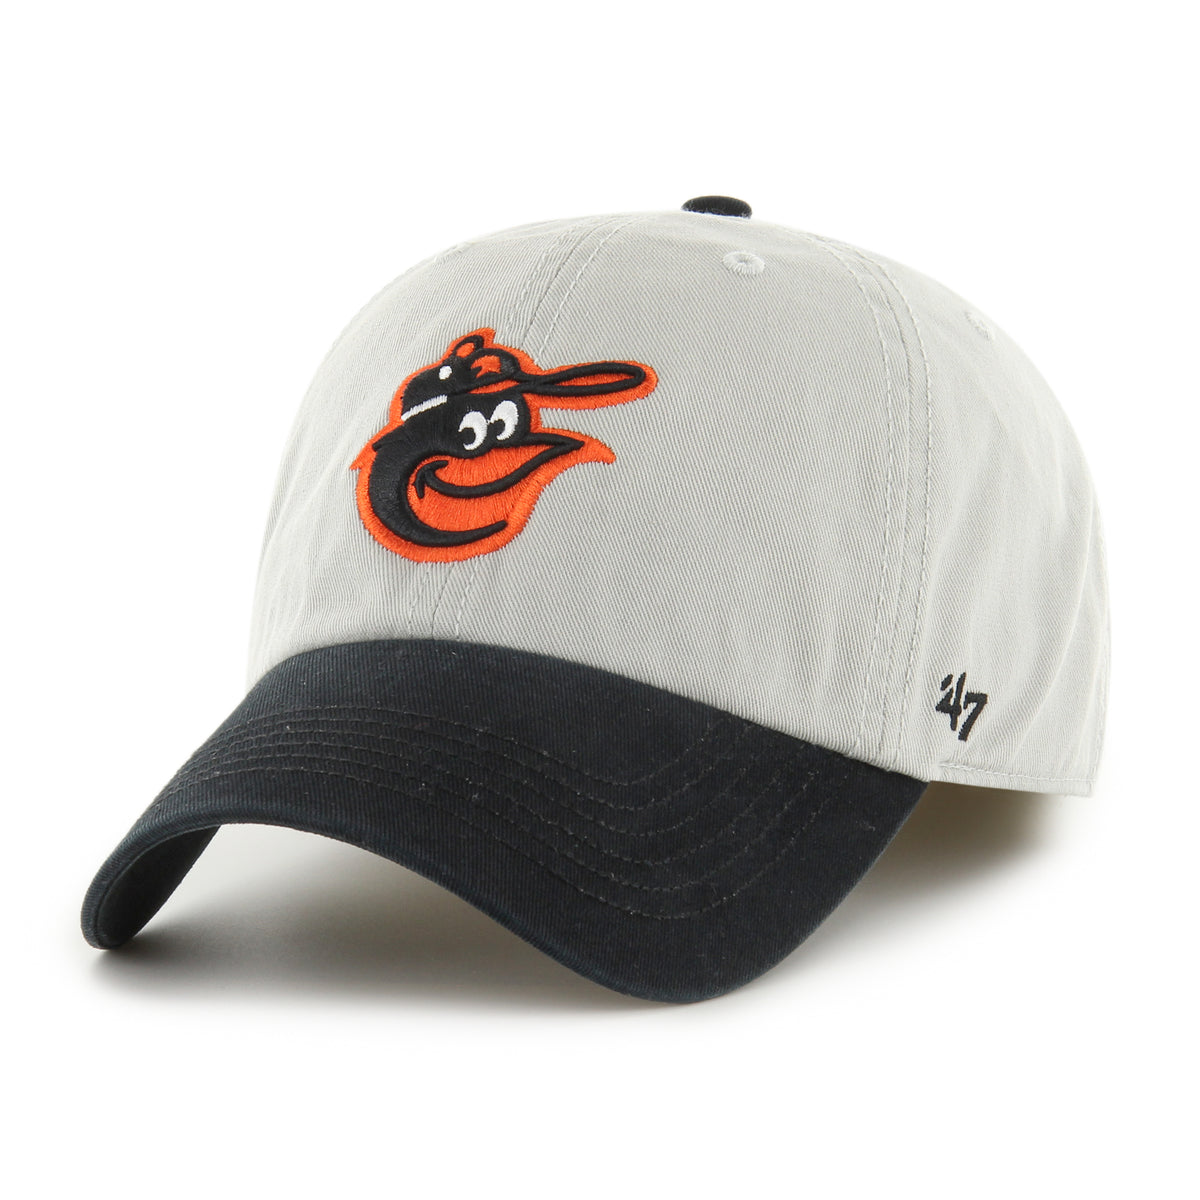 BALTIMORE ORIOLES COOPERSTOWN WORLD SERIES SURE SHOT CLASSIC TWO TONE '47 FRANCHISE